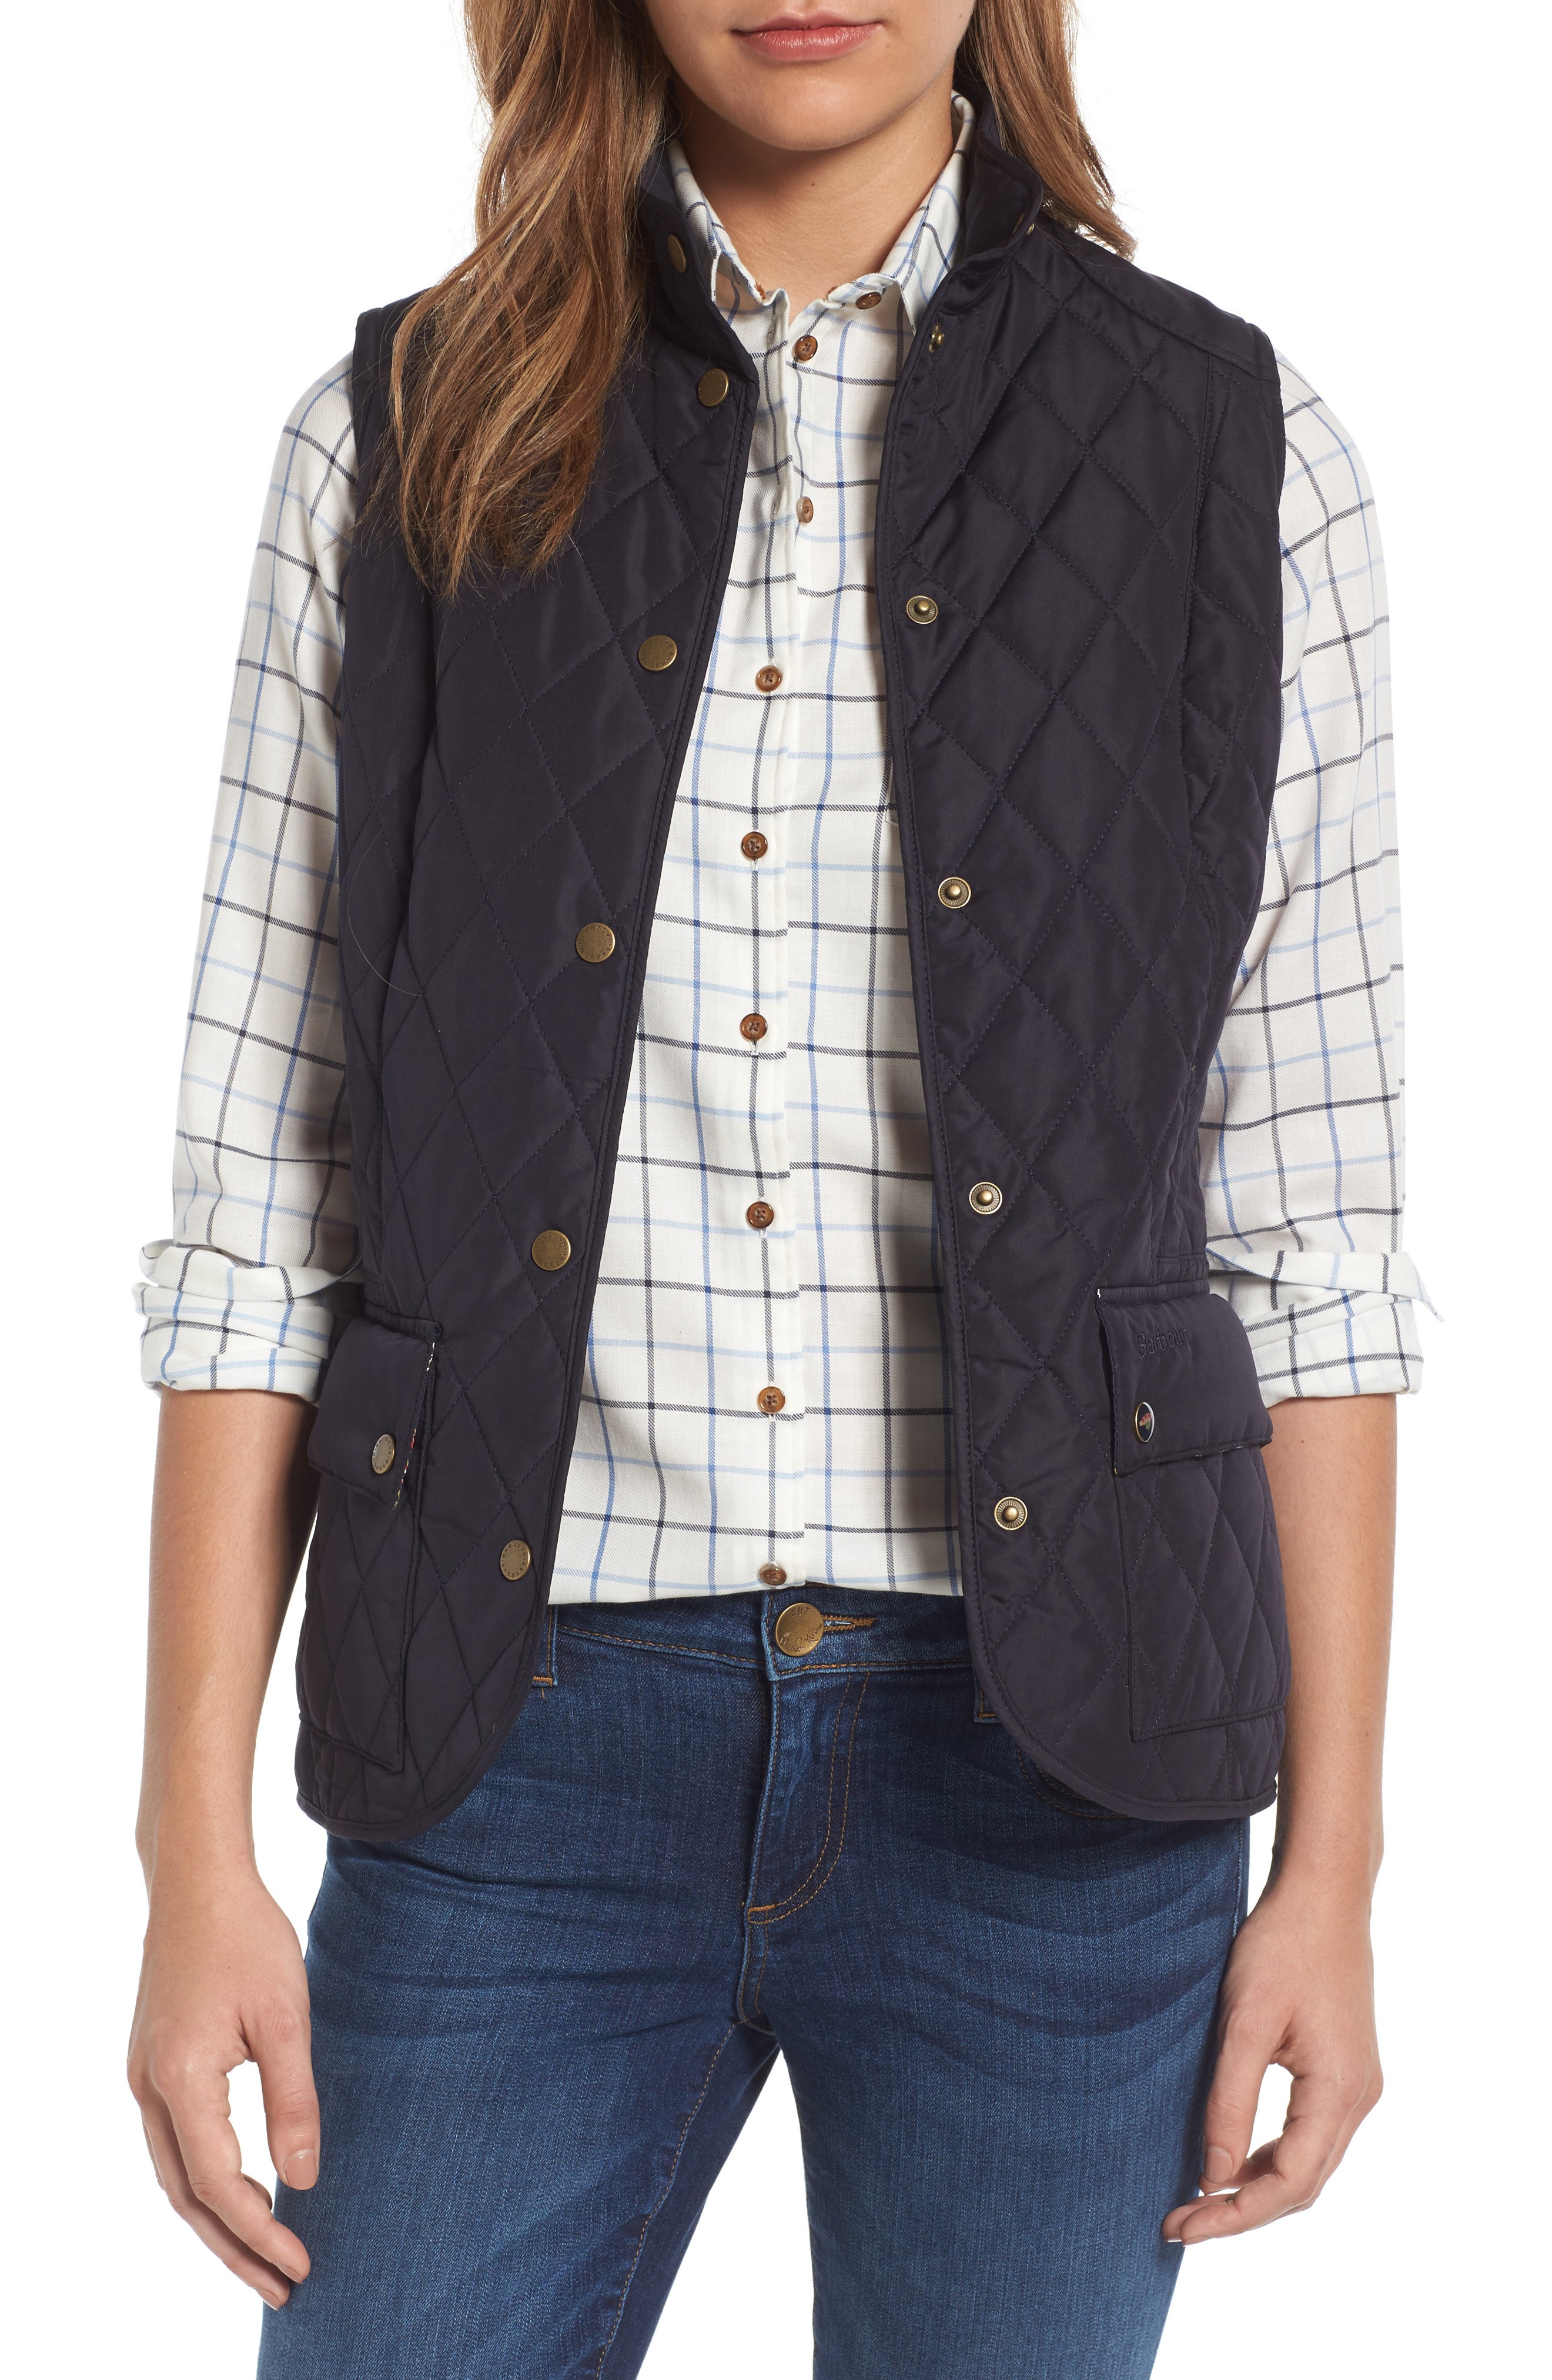 Preppy Vests to Wear Fall 2017: It's Hit or Miss Every Year